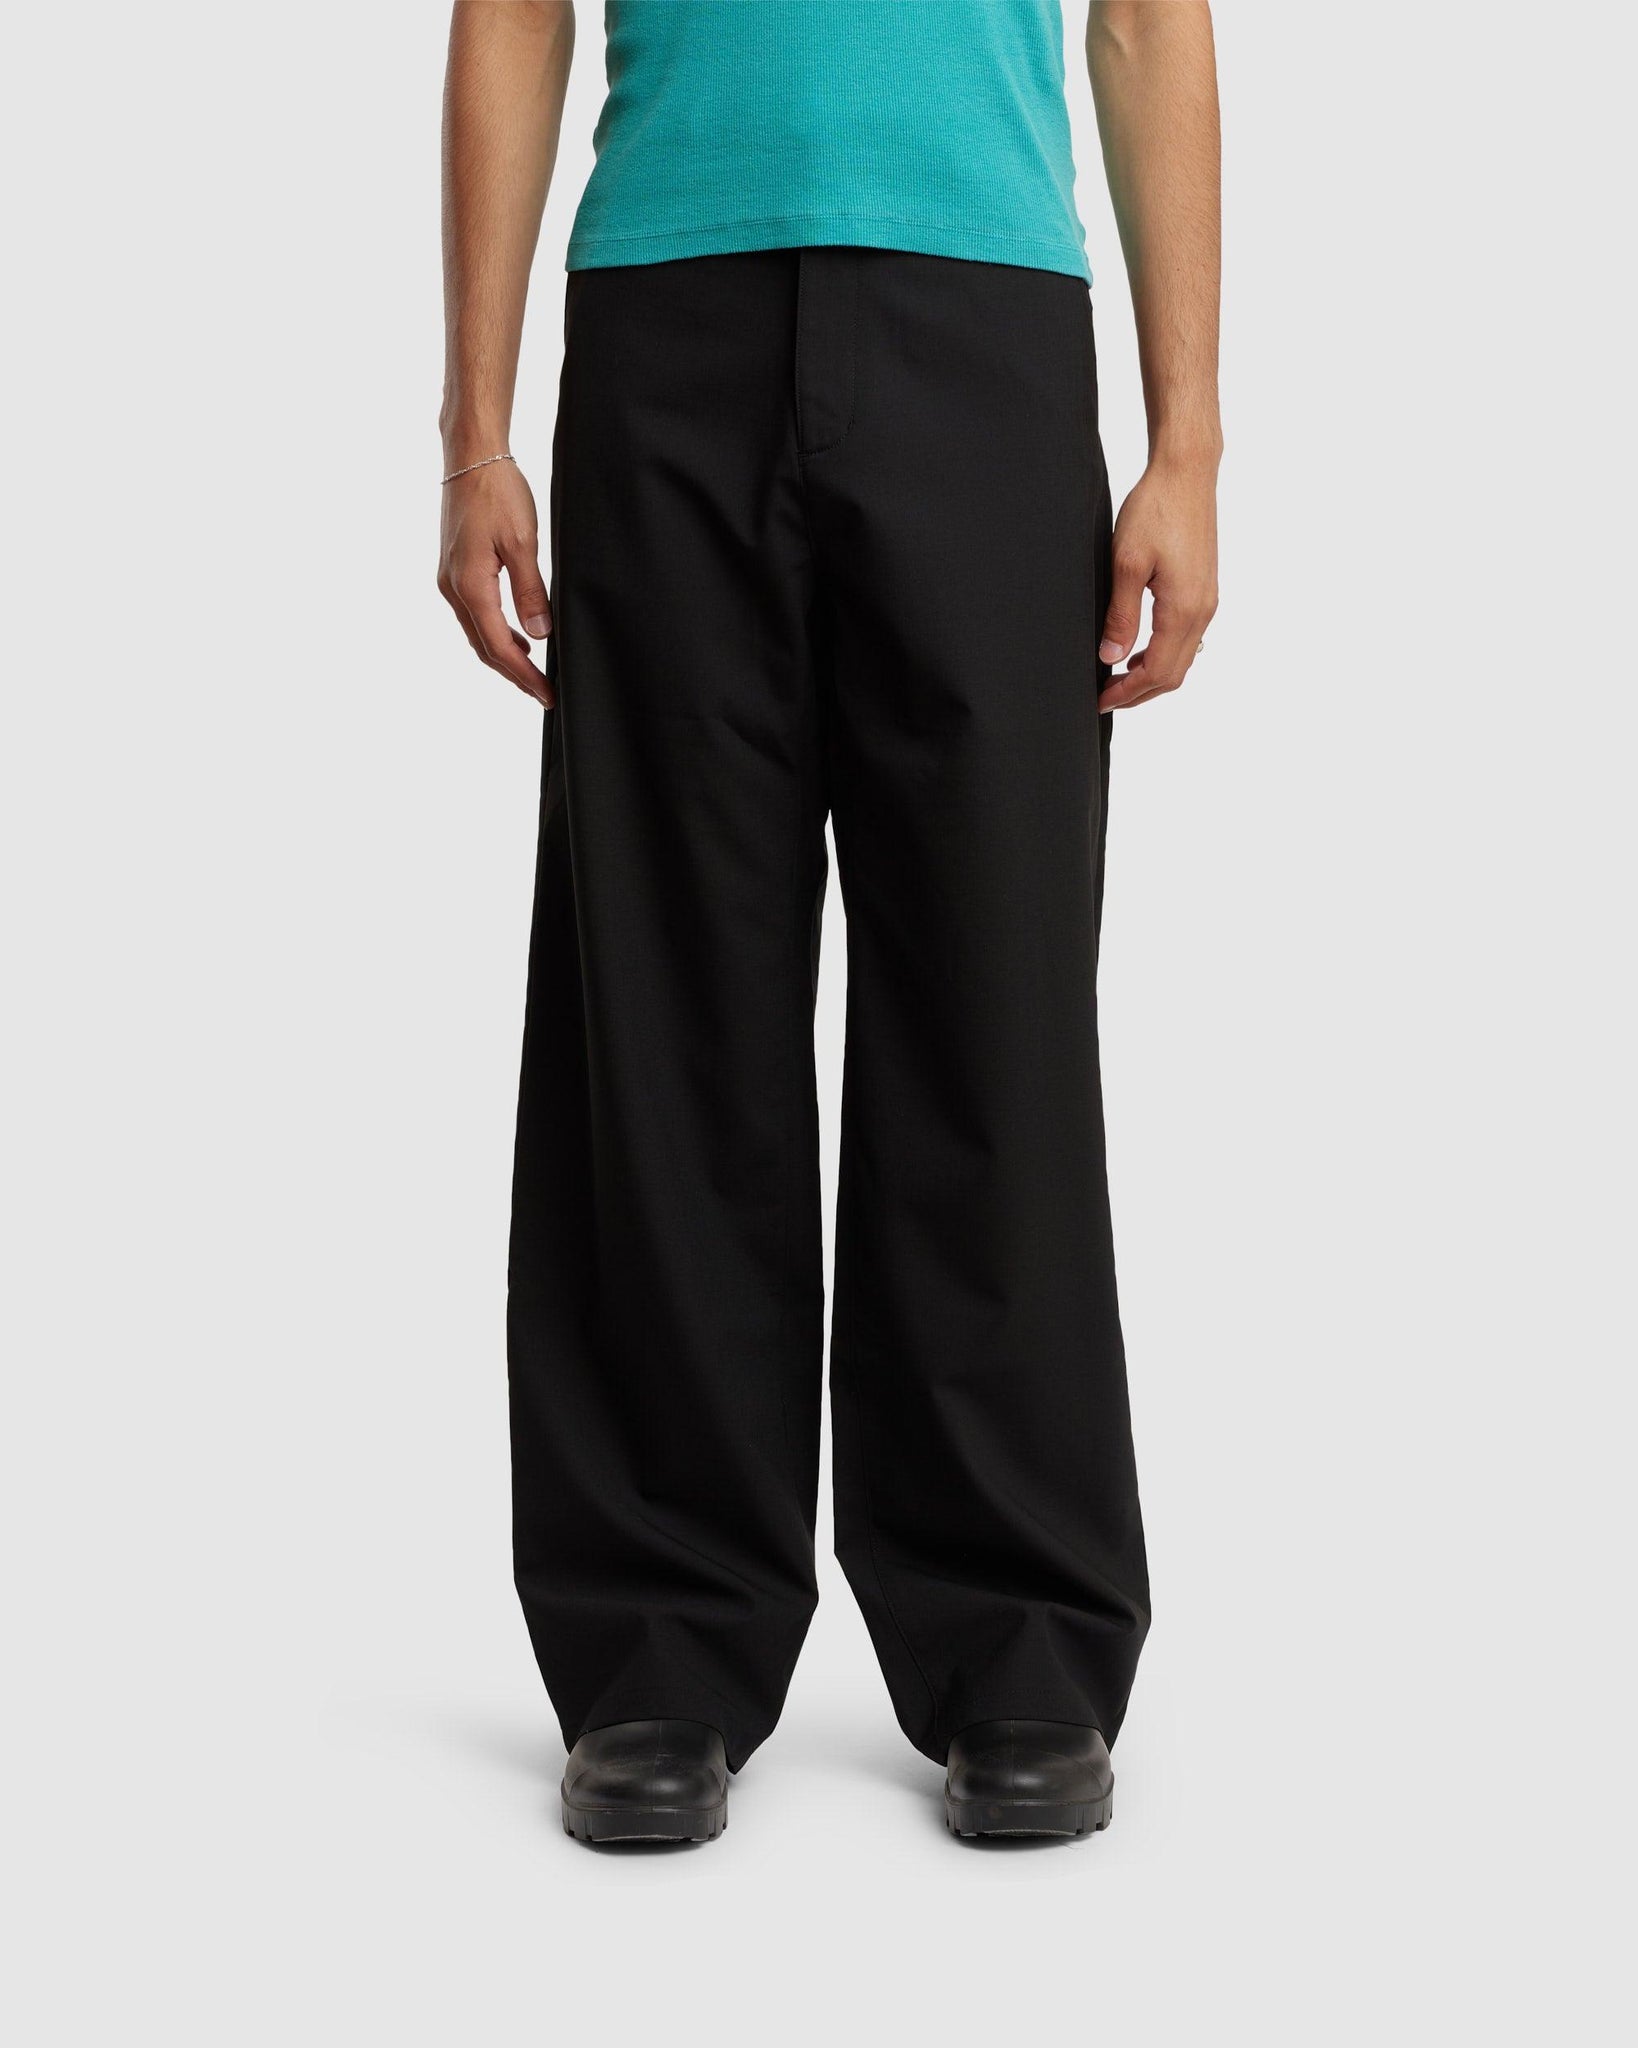 Wind Trousers Black Suit - {{ collection.title }} - Chinatown Country Club 